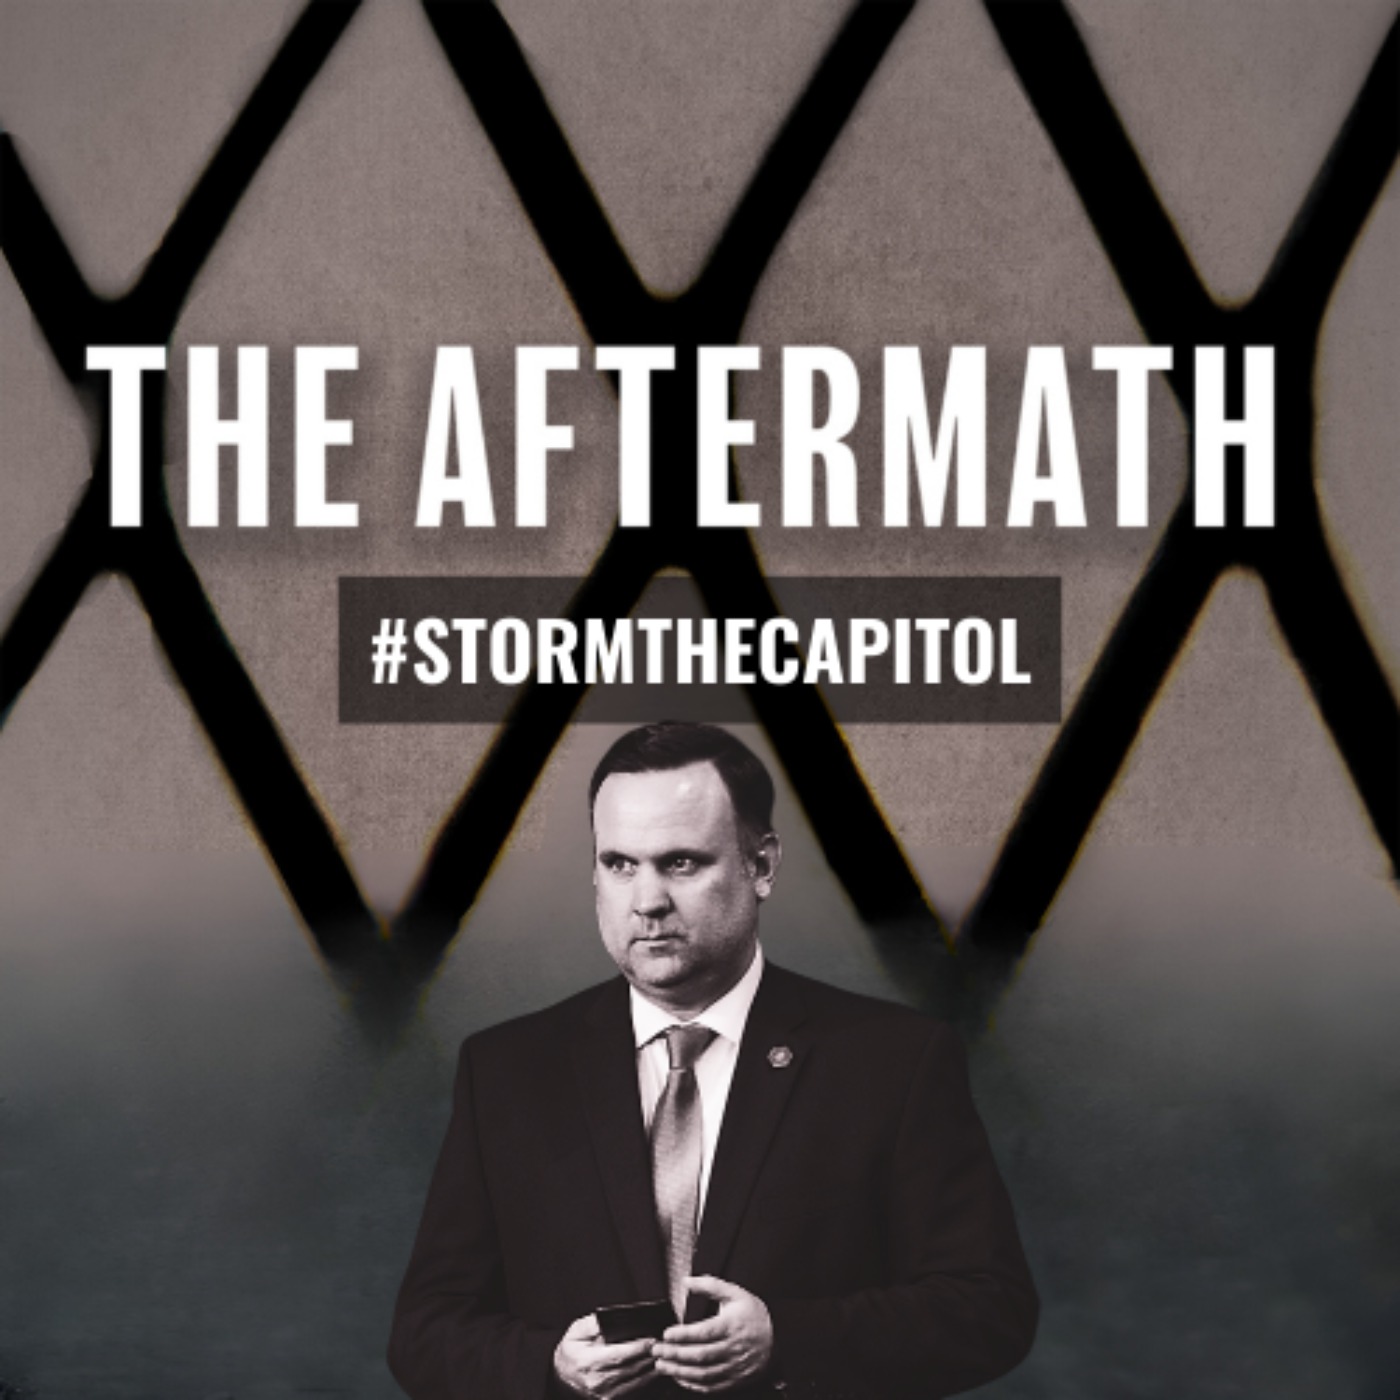 The Aftermath S2E3 -  #StormtheCapitol